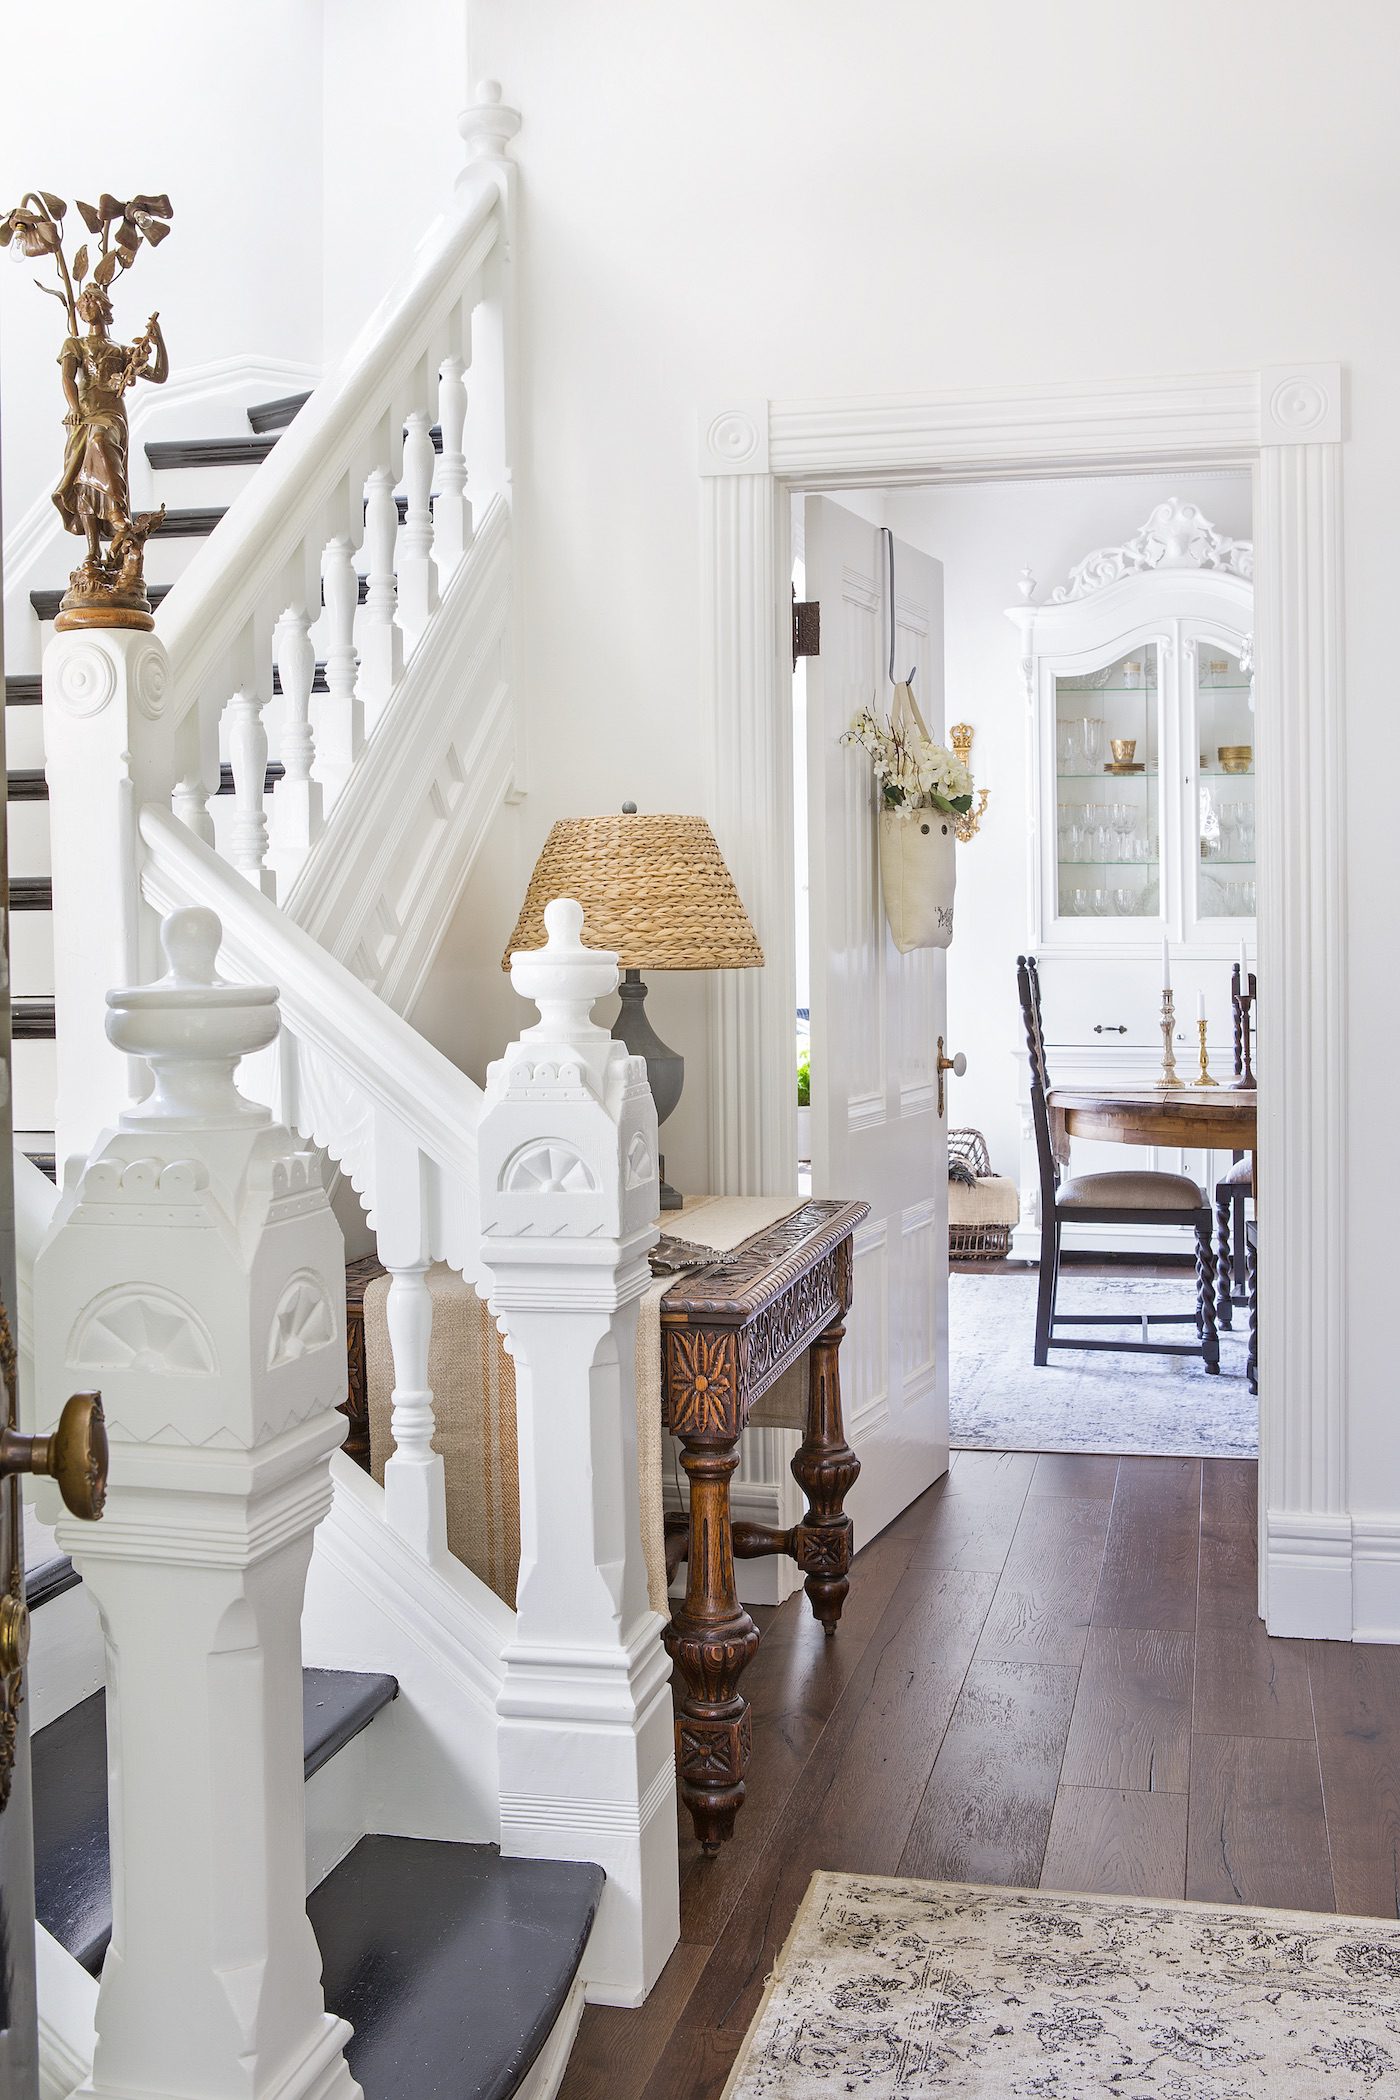 Entryway and staircase with white decor and hardwood floors in french farmhouse style